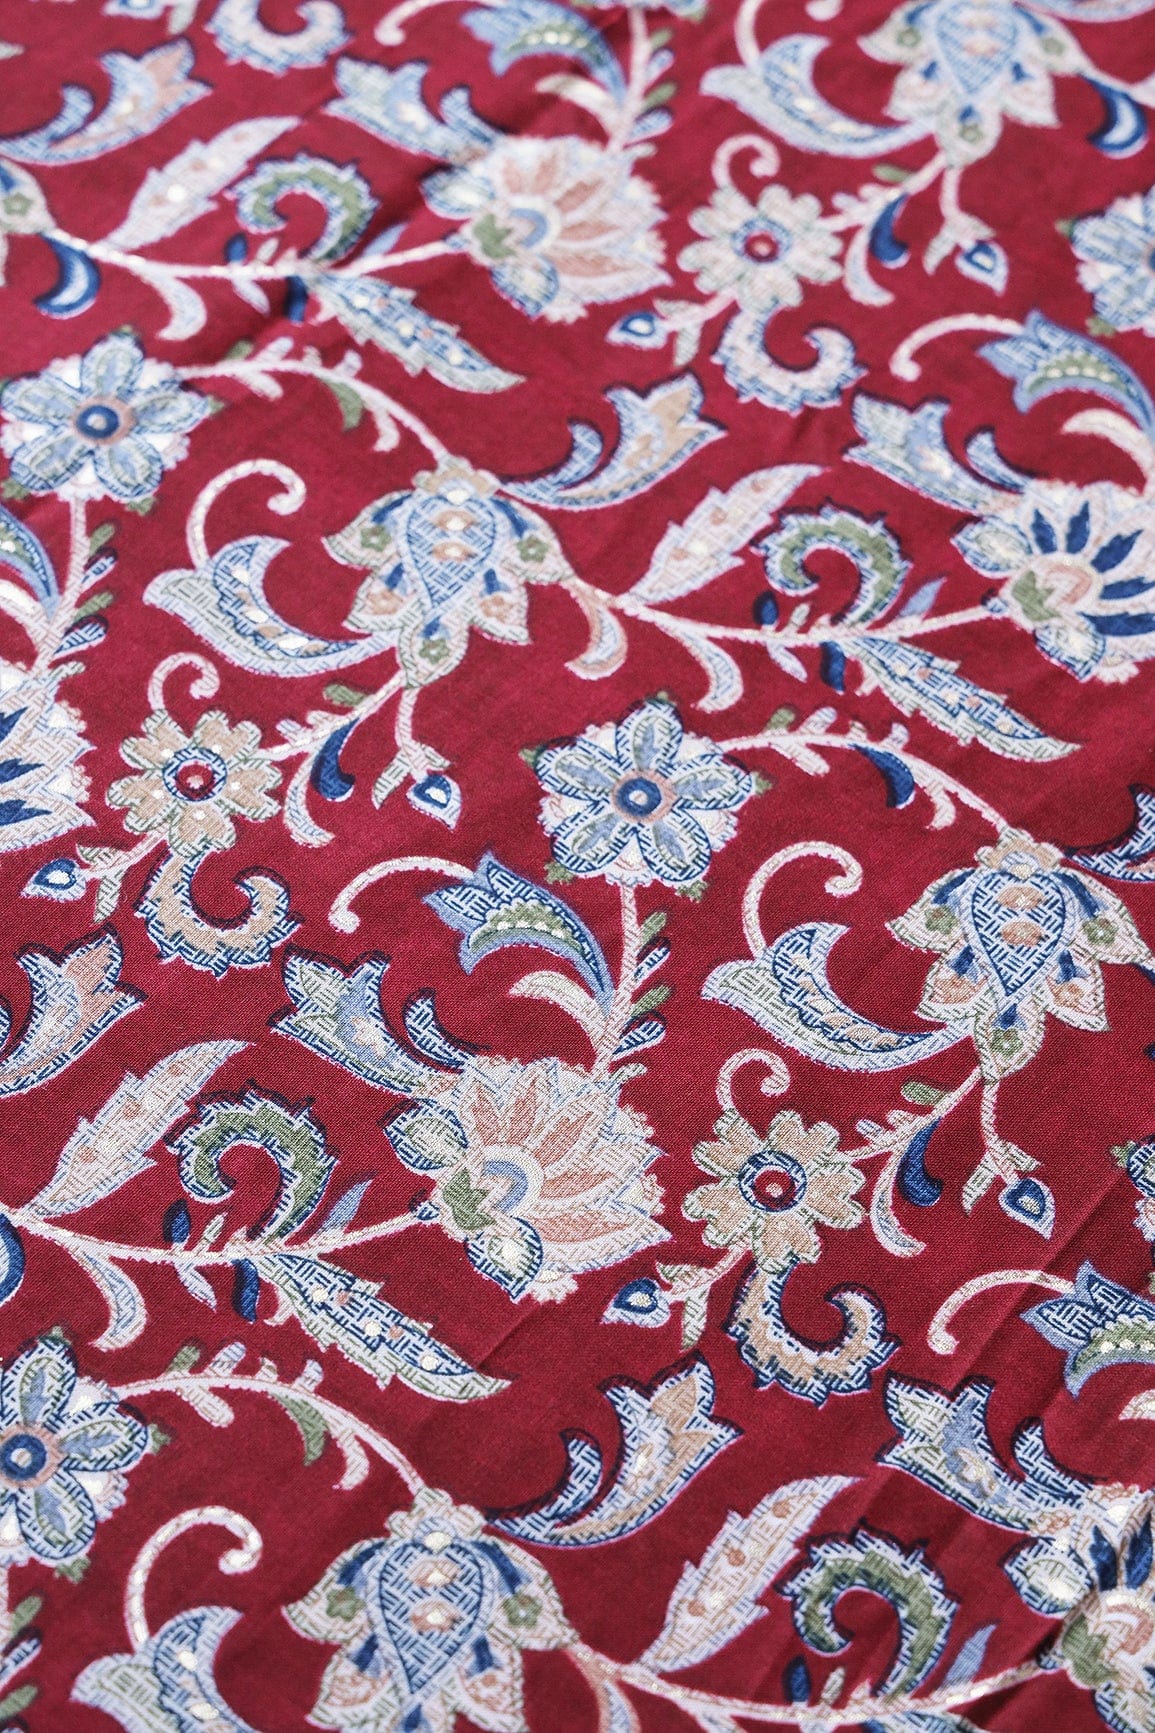 doeraa Prints Multi Color Floral Pattern With Foil Print On Maroon Rayon Fabric